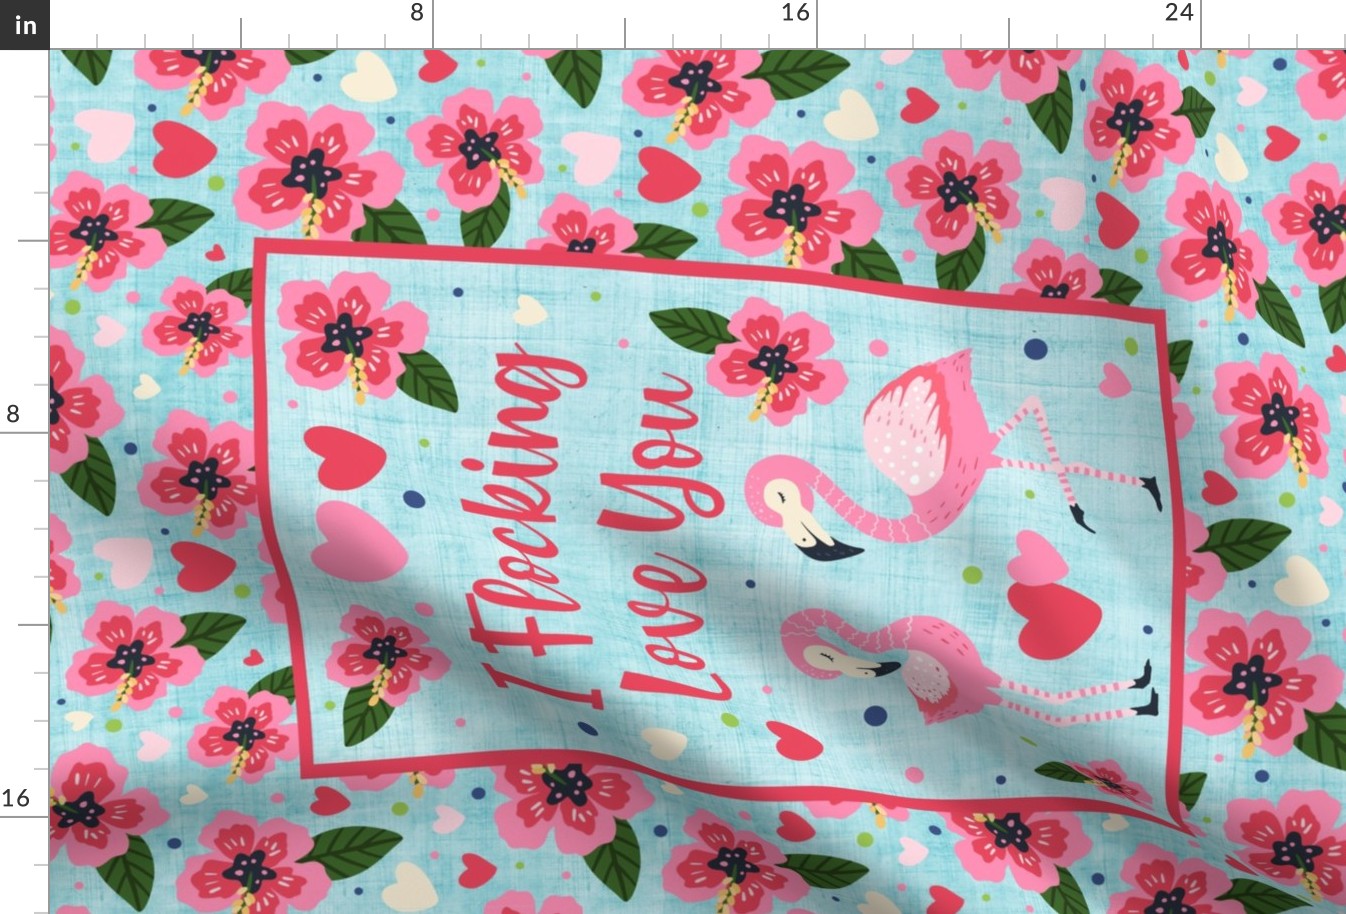 Large 27x18 Fat Quarter Panel I Flocking Love You Pink Flamingos and Tropical Hibiscus Flowers for Wall Art or Tea Towel